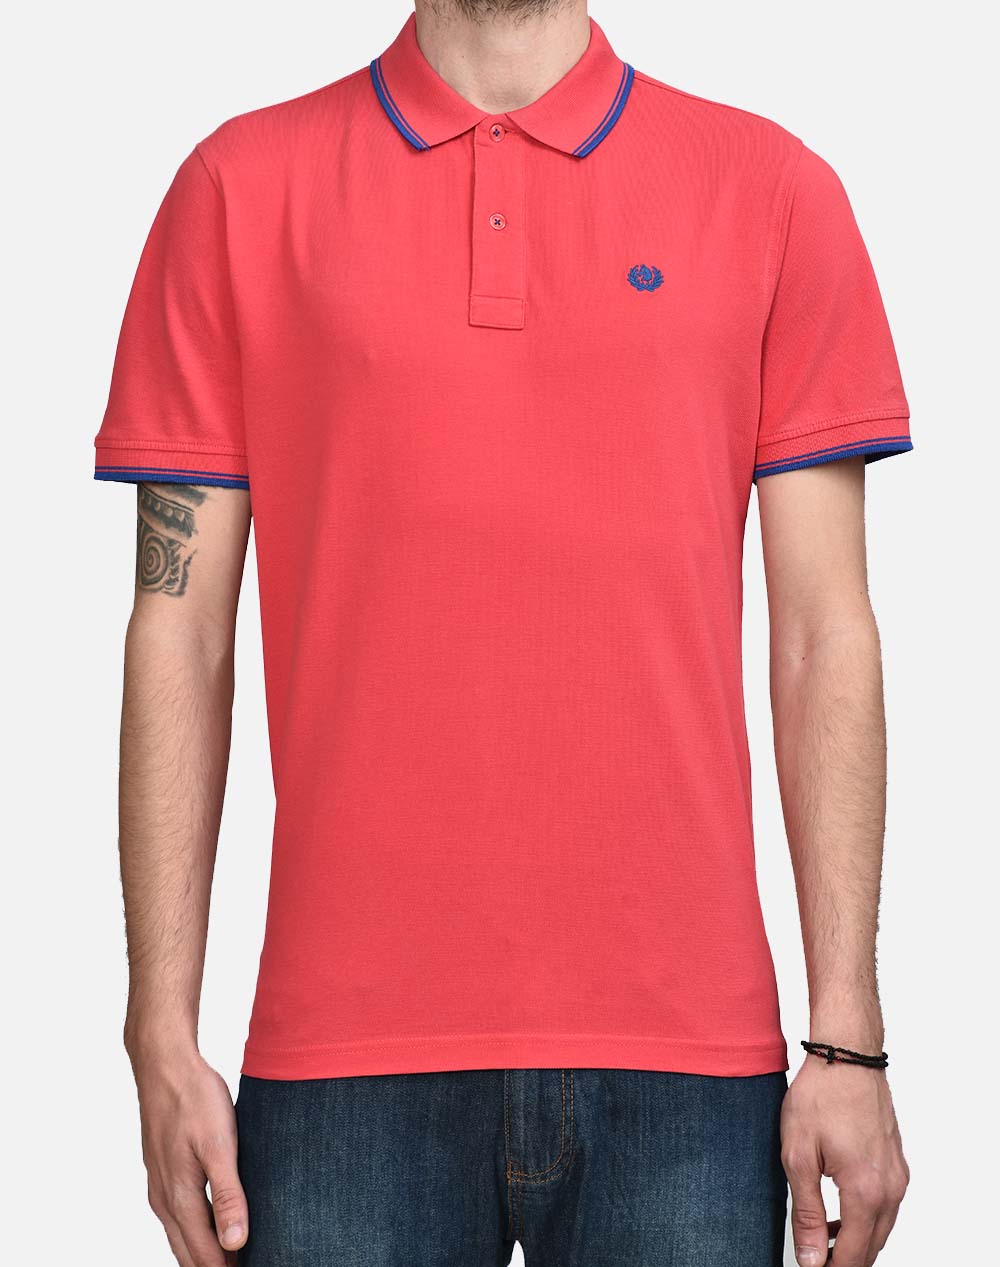 ASCOT ΜΠΛΟΥΖΑ POLO 1538836023 Red